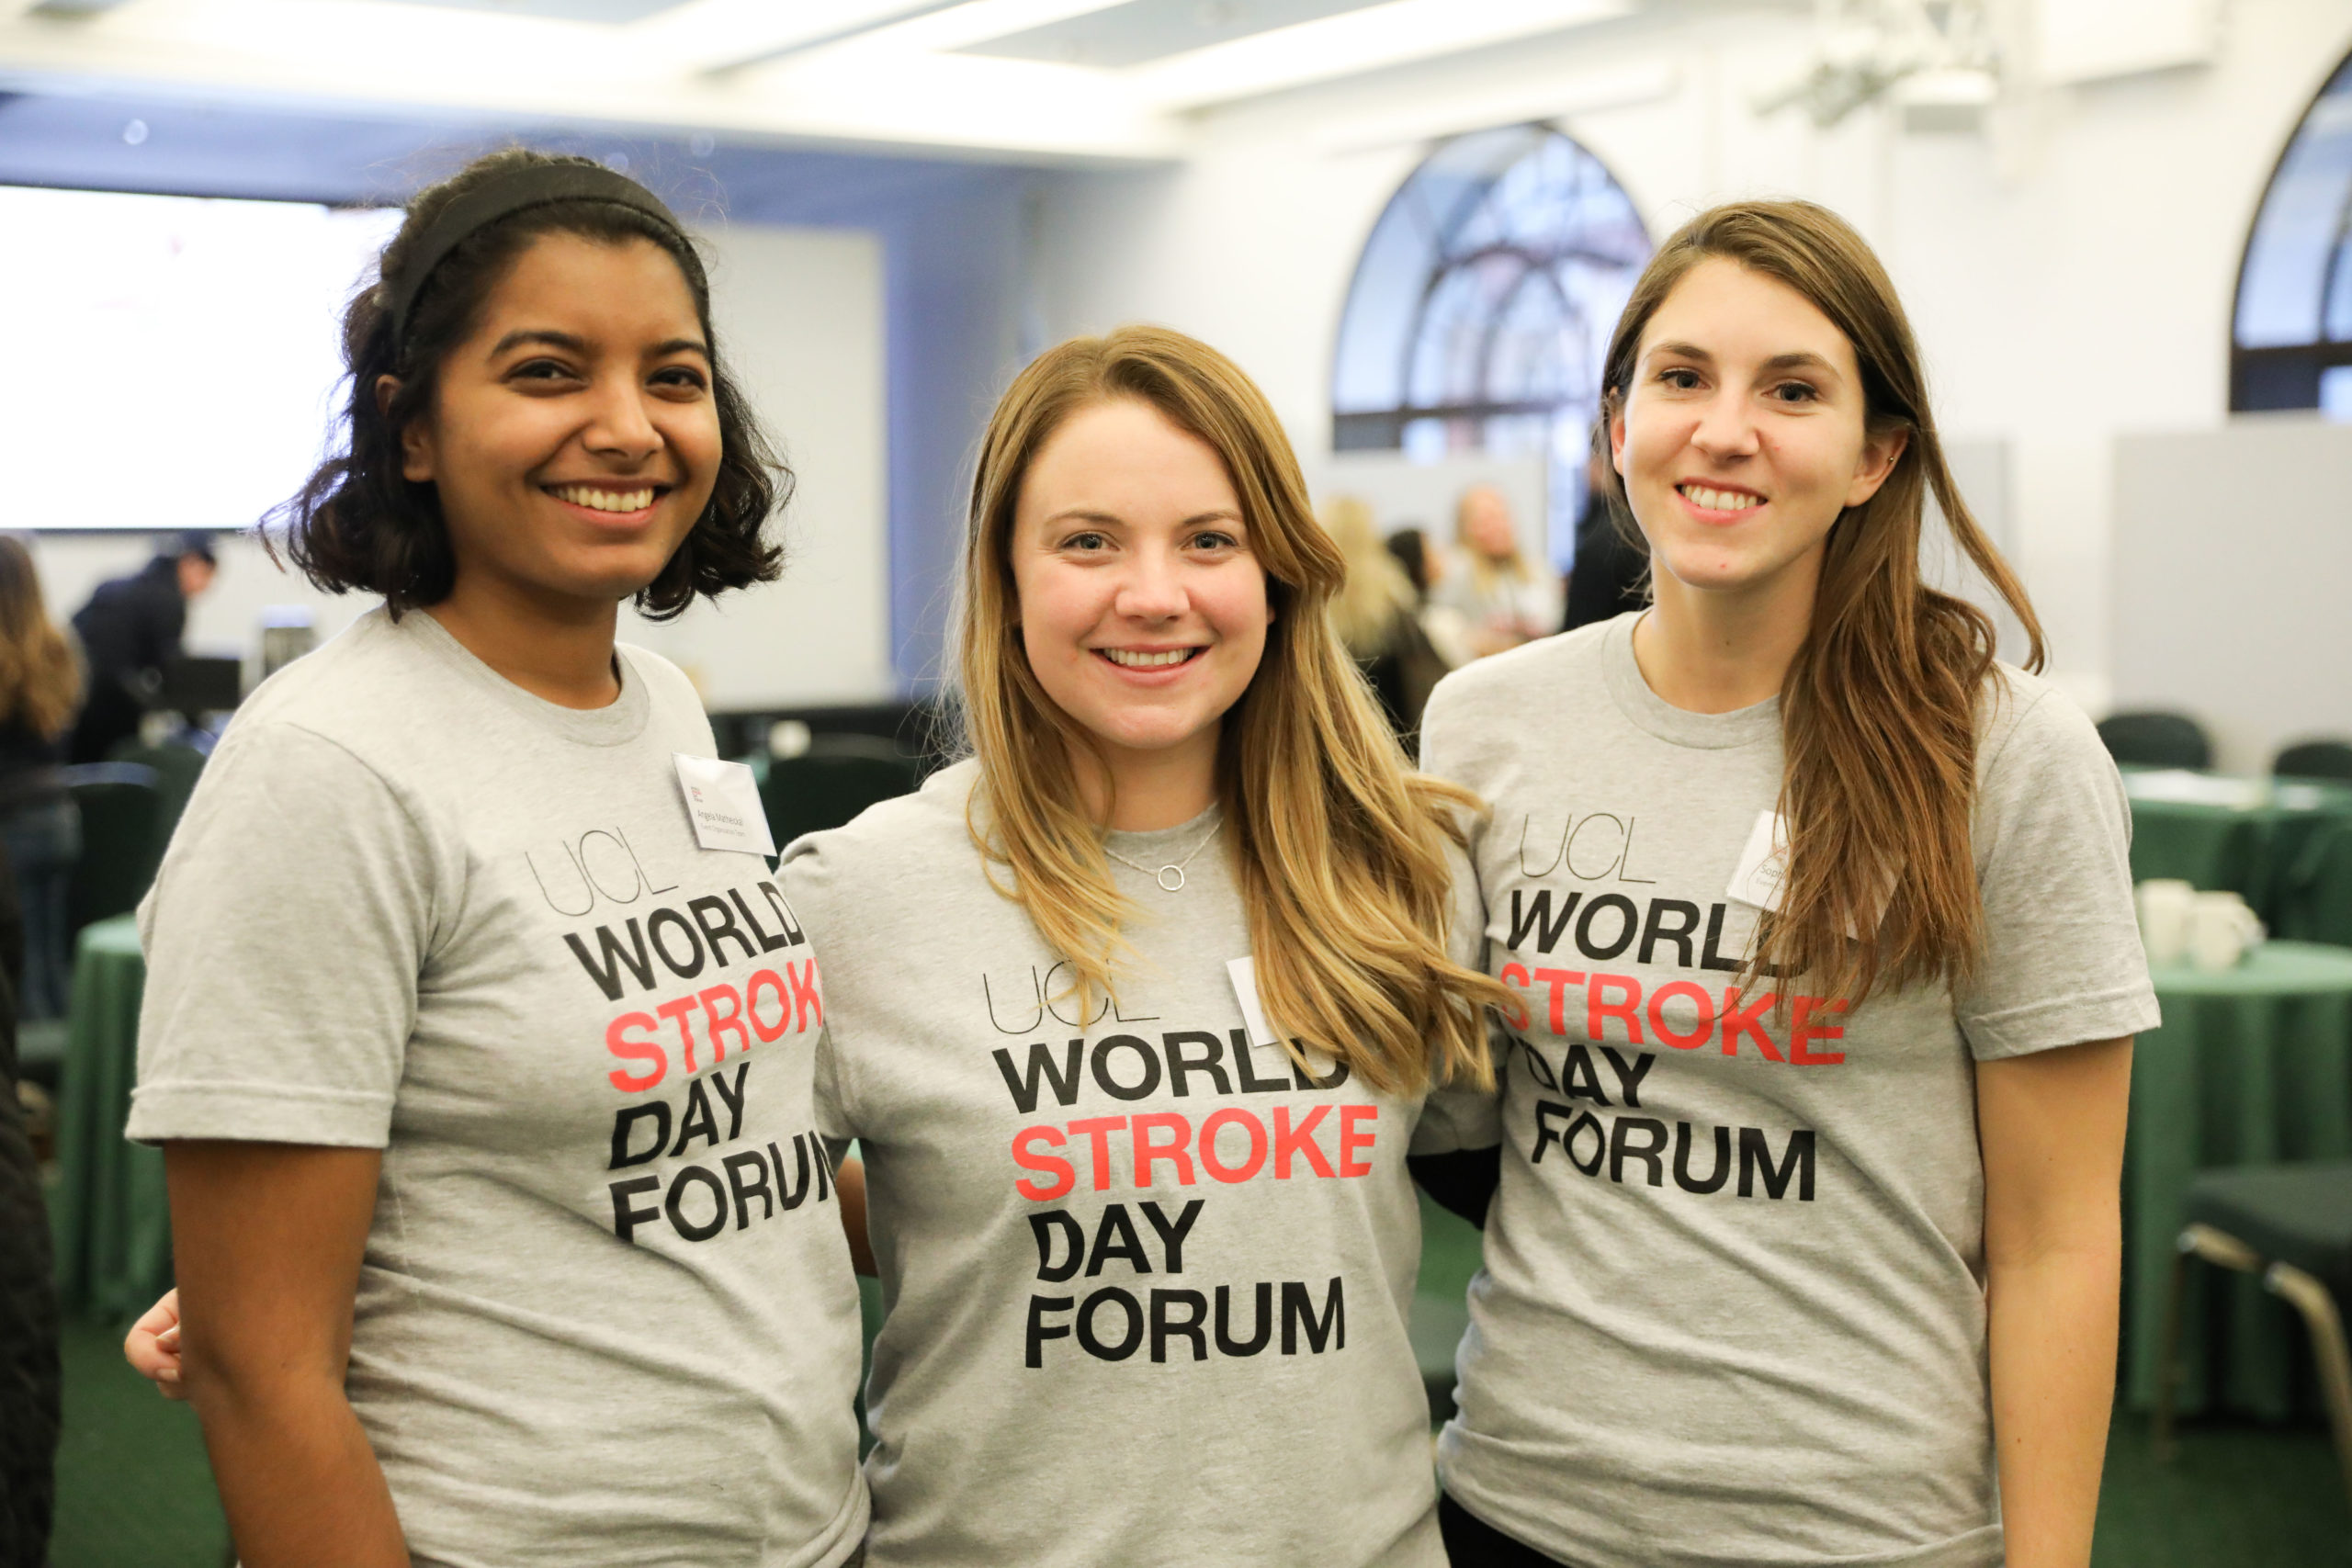 UCL World Stroke Day Forum 2019 image